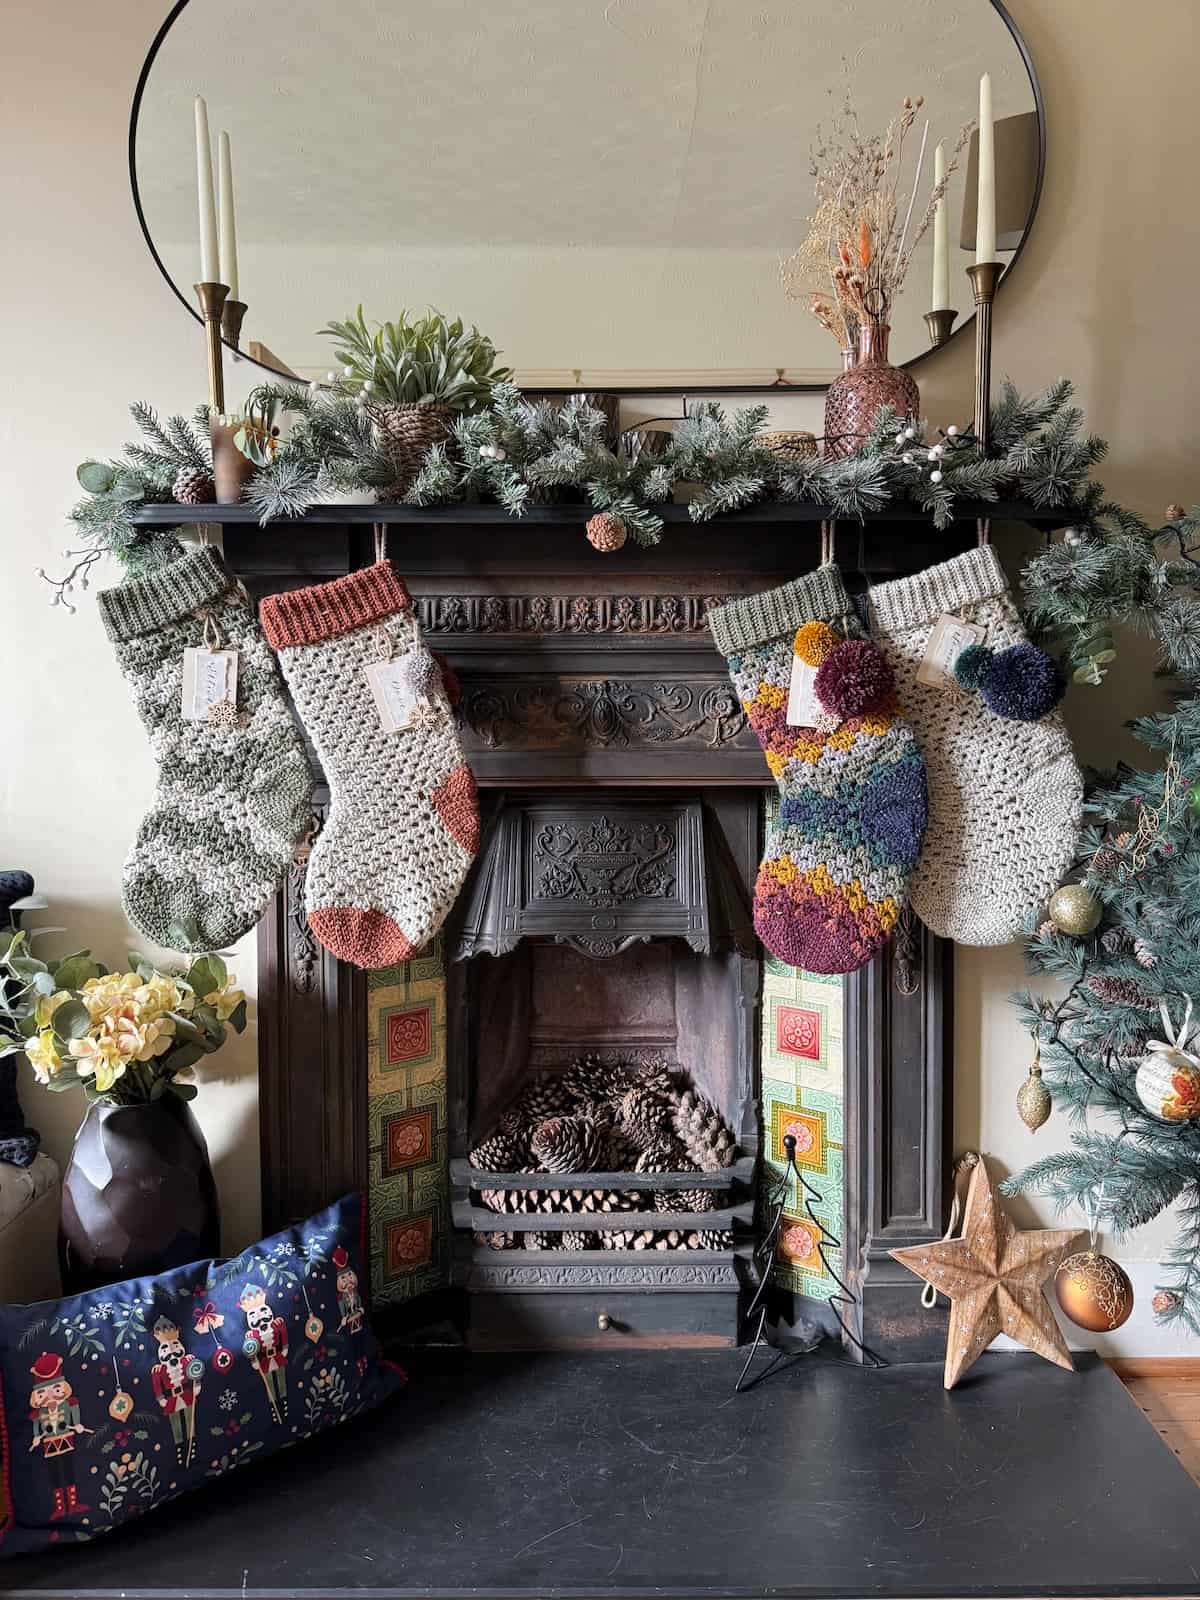 Multi colour crochet Christmas stockings on a mantle in front of a fireplace.